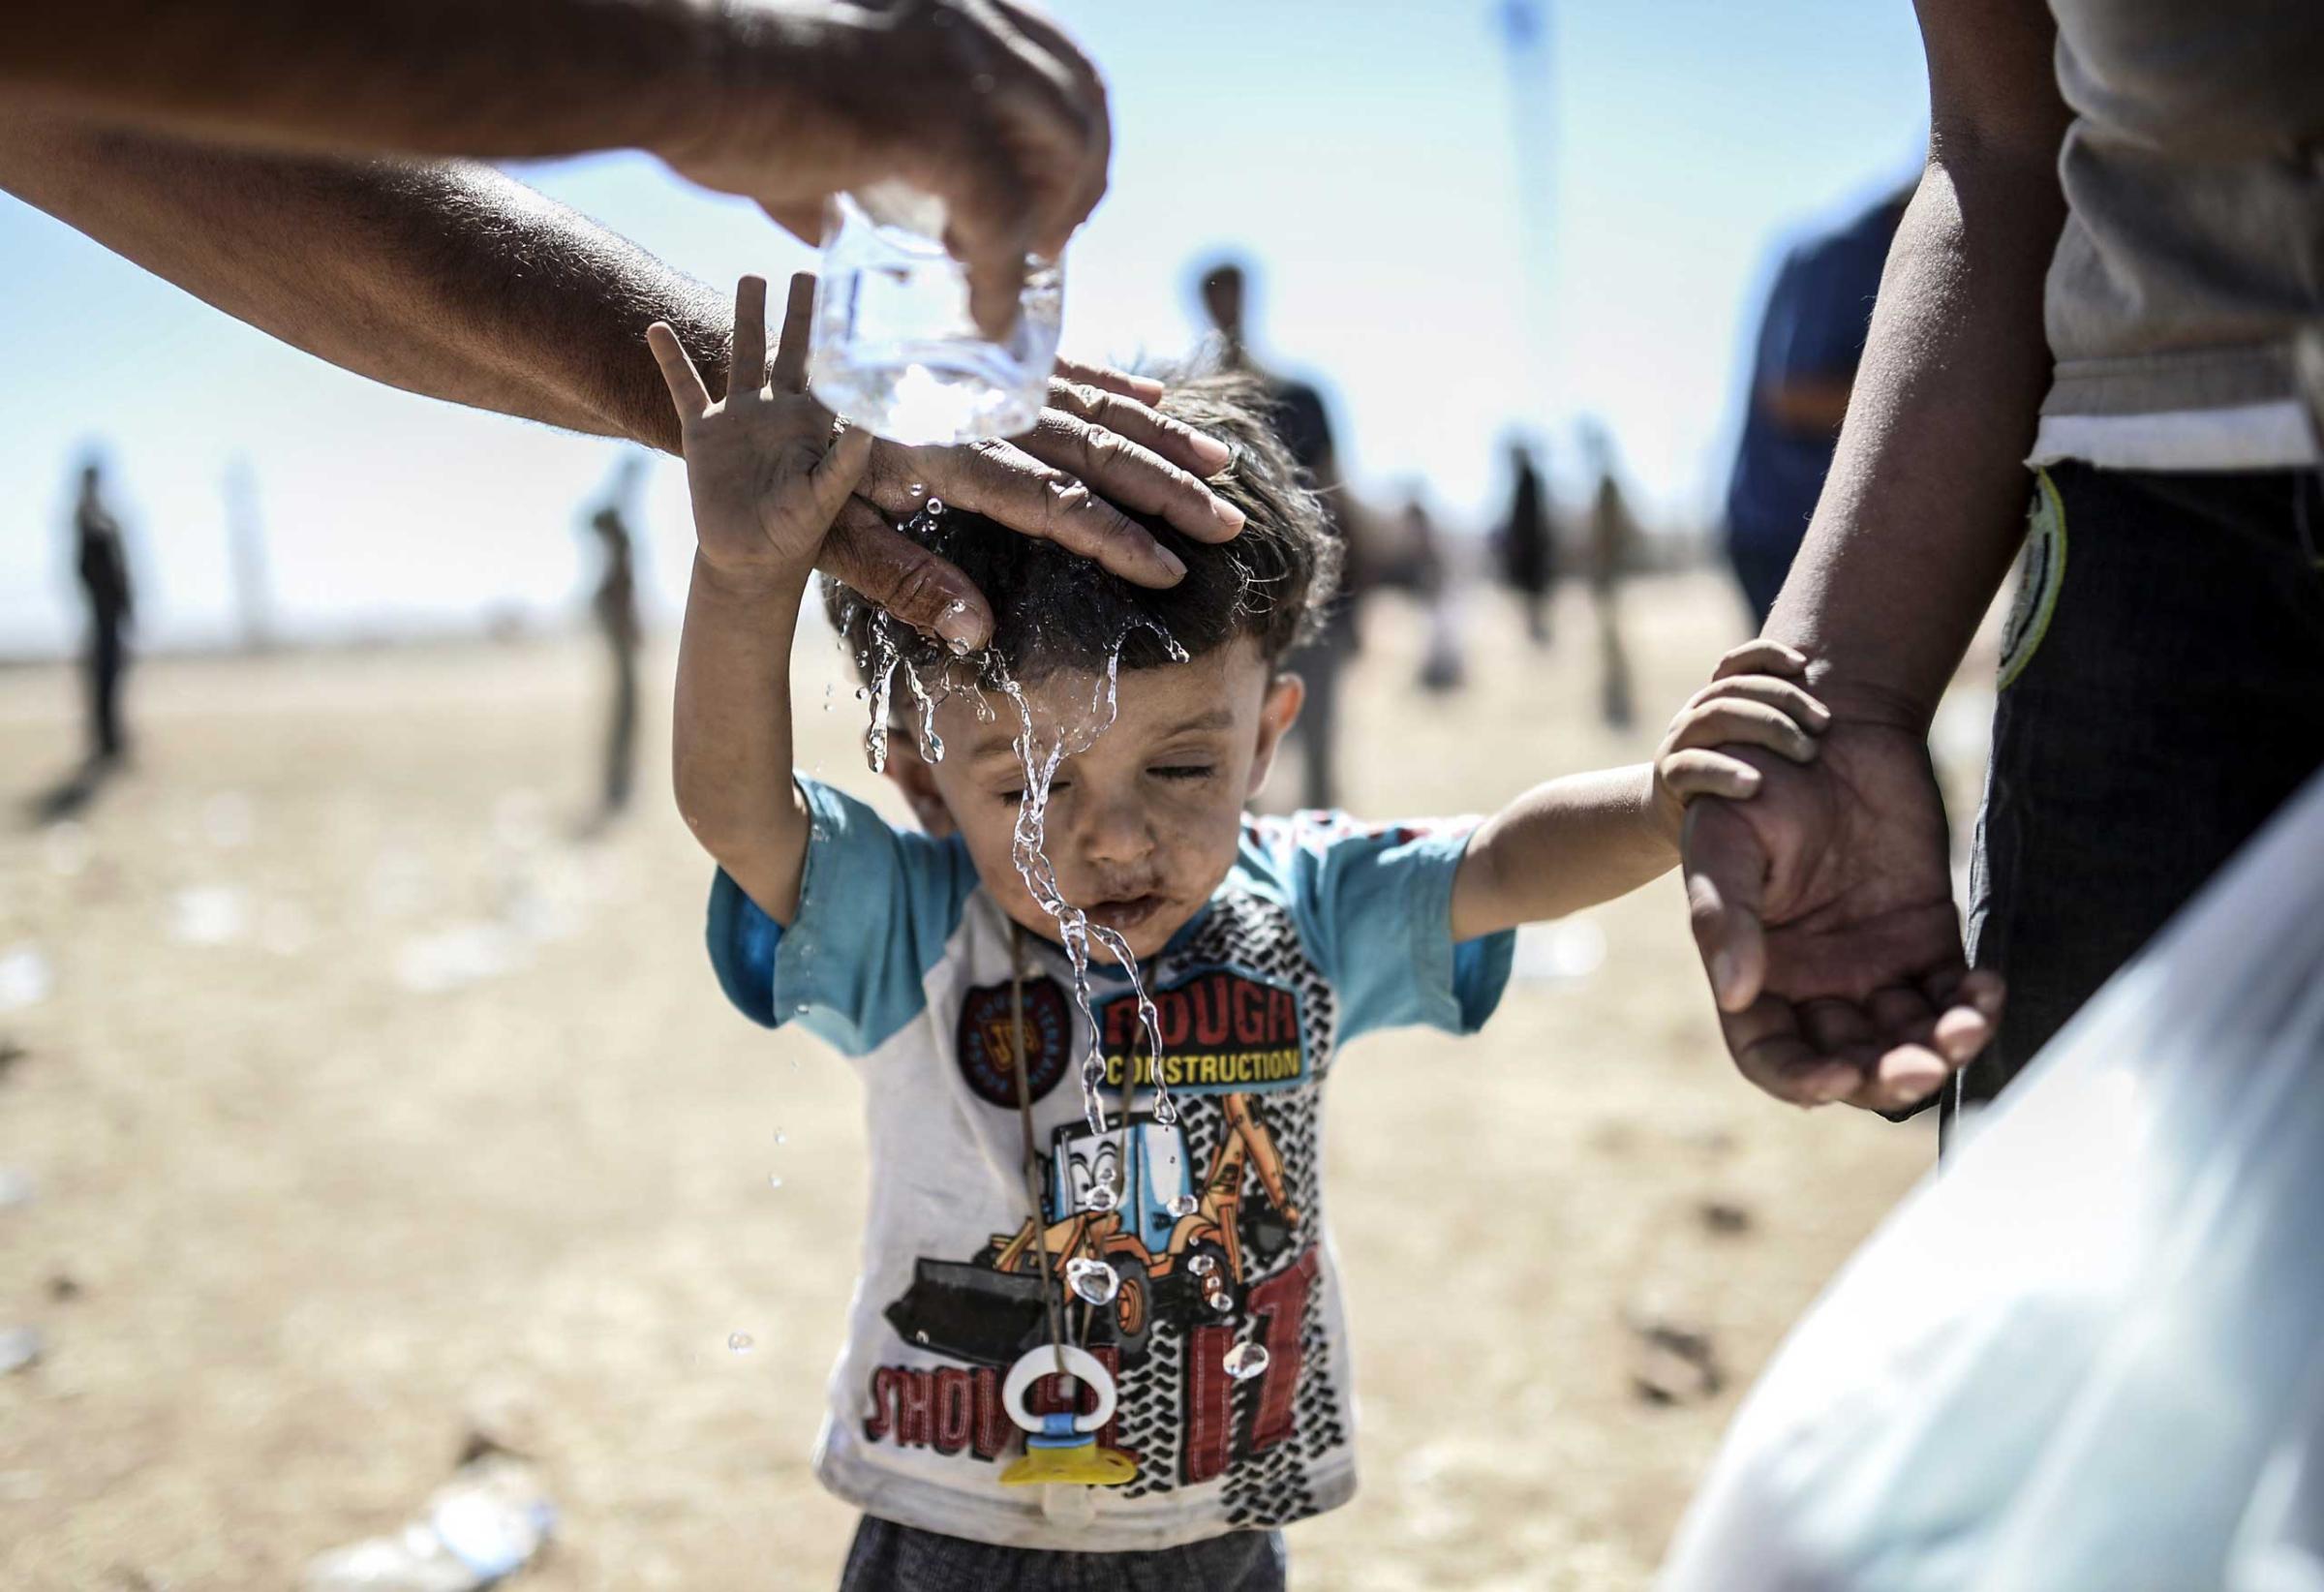 A Syrian Kurd pours water on a child after they crossed the border between Syria andTurkey near the southeastern town of Suruc in Sanliurfa province, on Sept. 20, 2014.